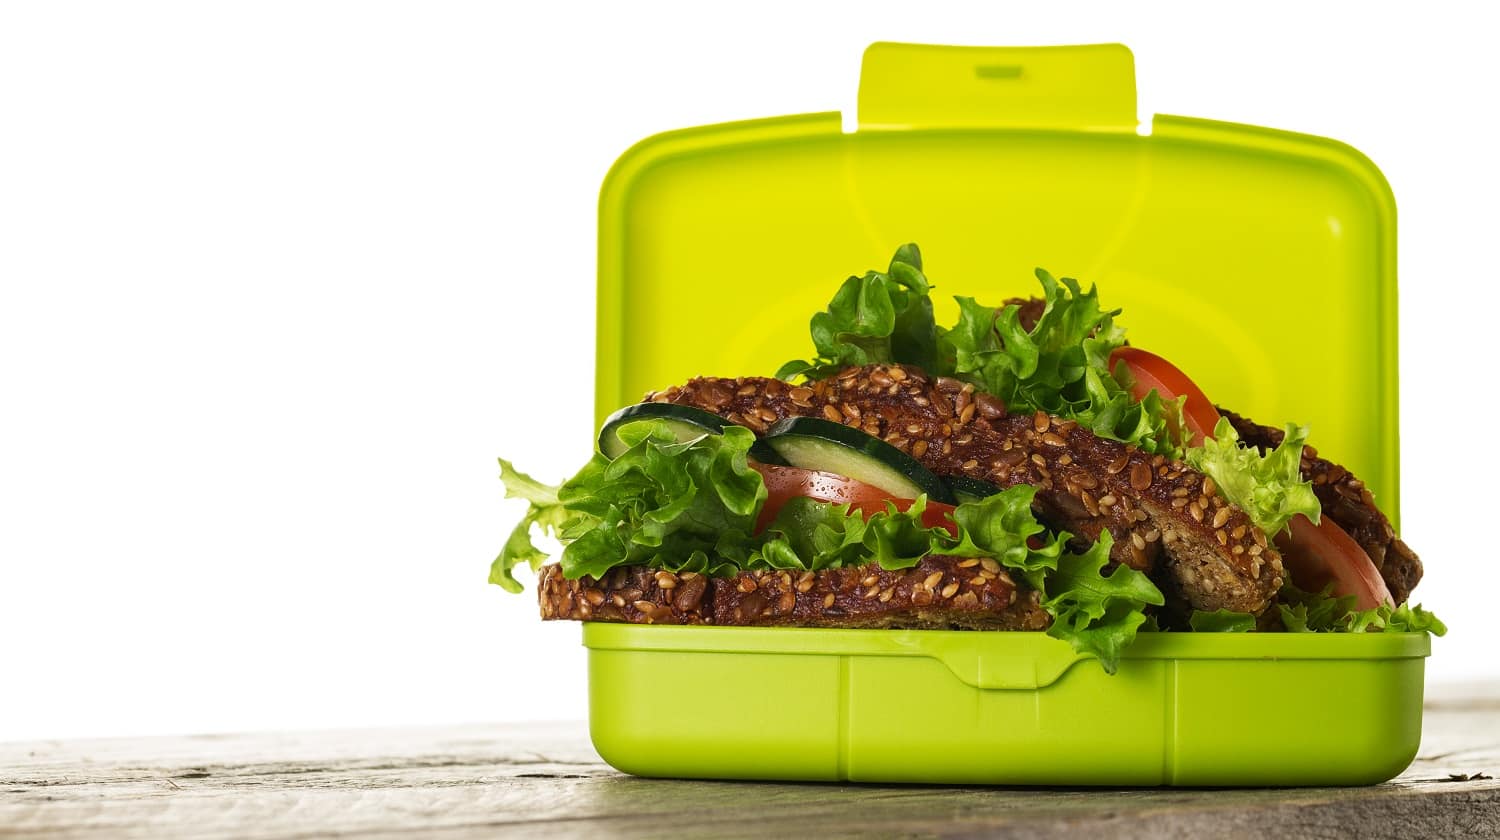 Tasty Healthy Vegetarian Vegan Sandwich in Lunch Box on Wooden Table on White Isolated Background. Horizontal. Copy Space.